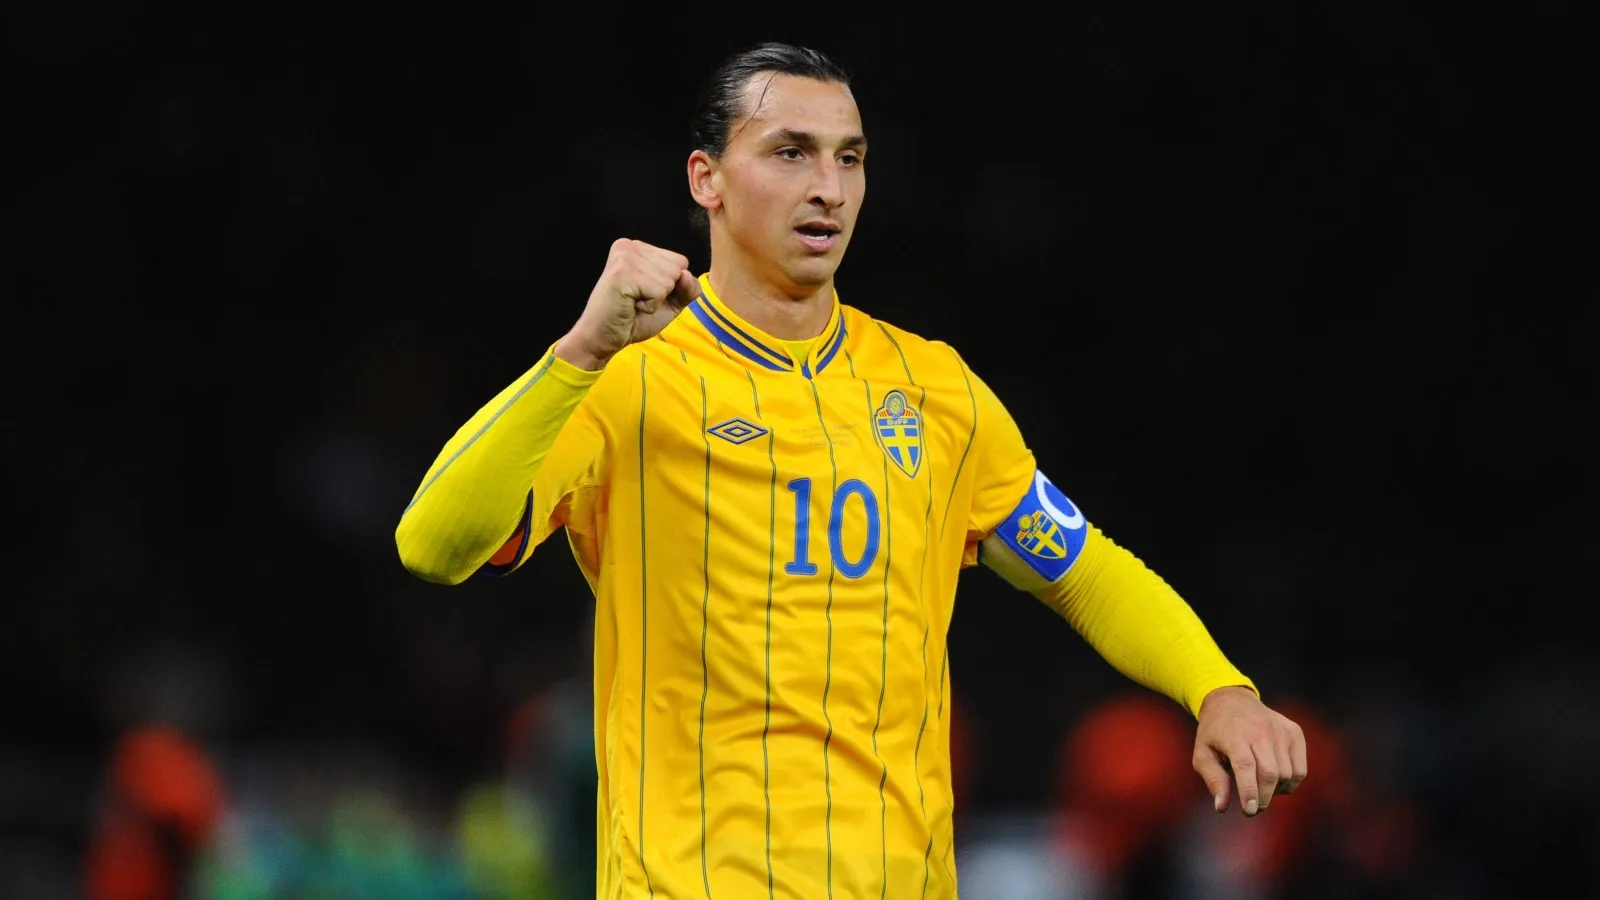     players with the highest combined transfer fees    |. Zlatan Ibrahimovic  | Sportz Point 